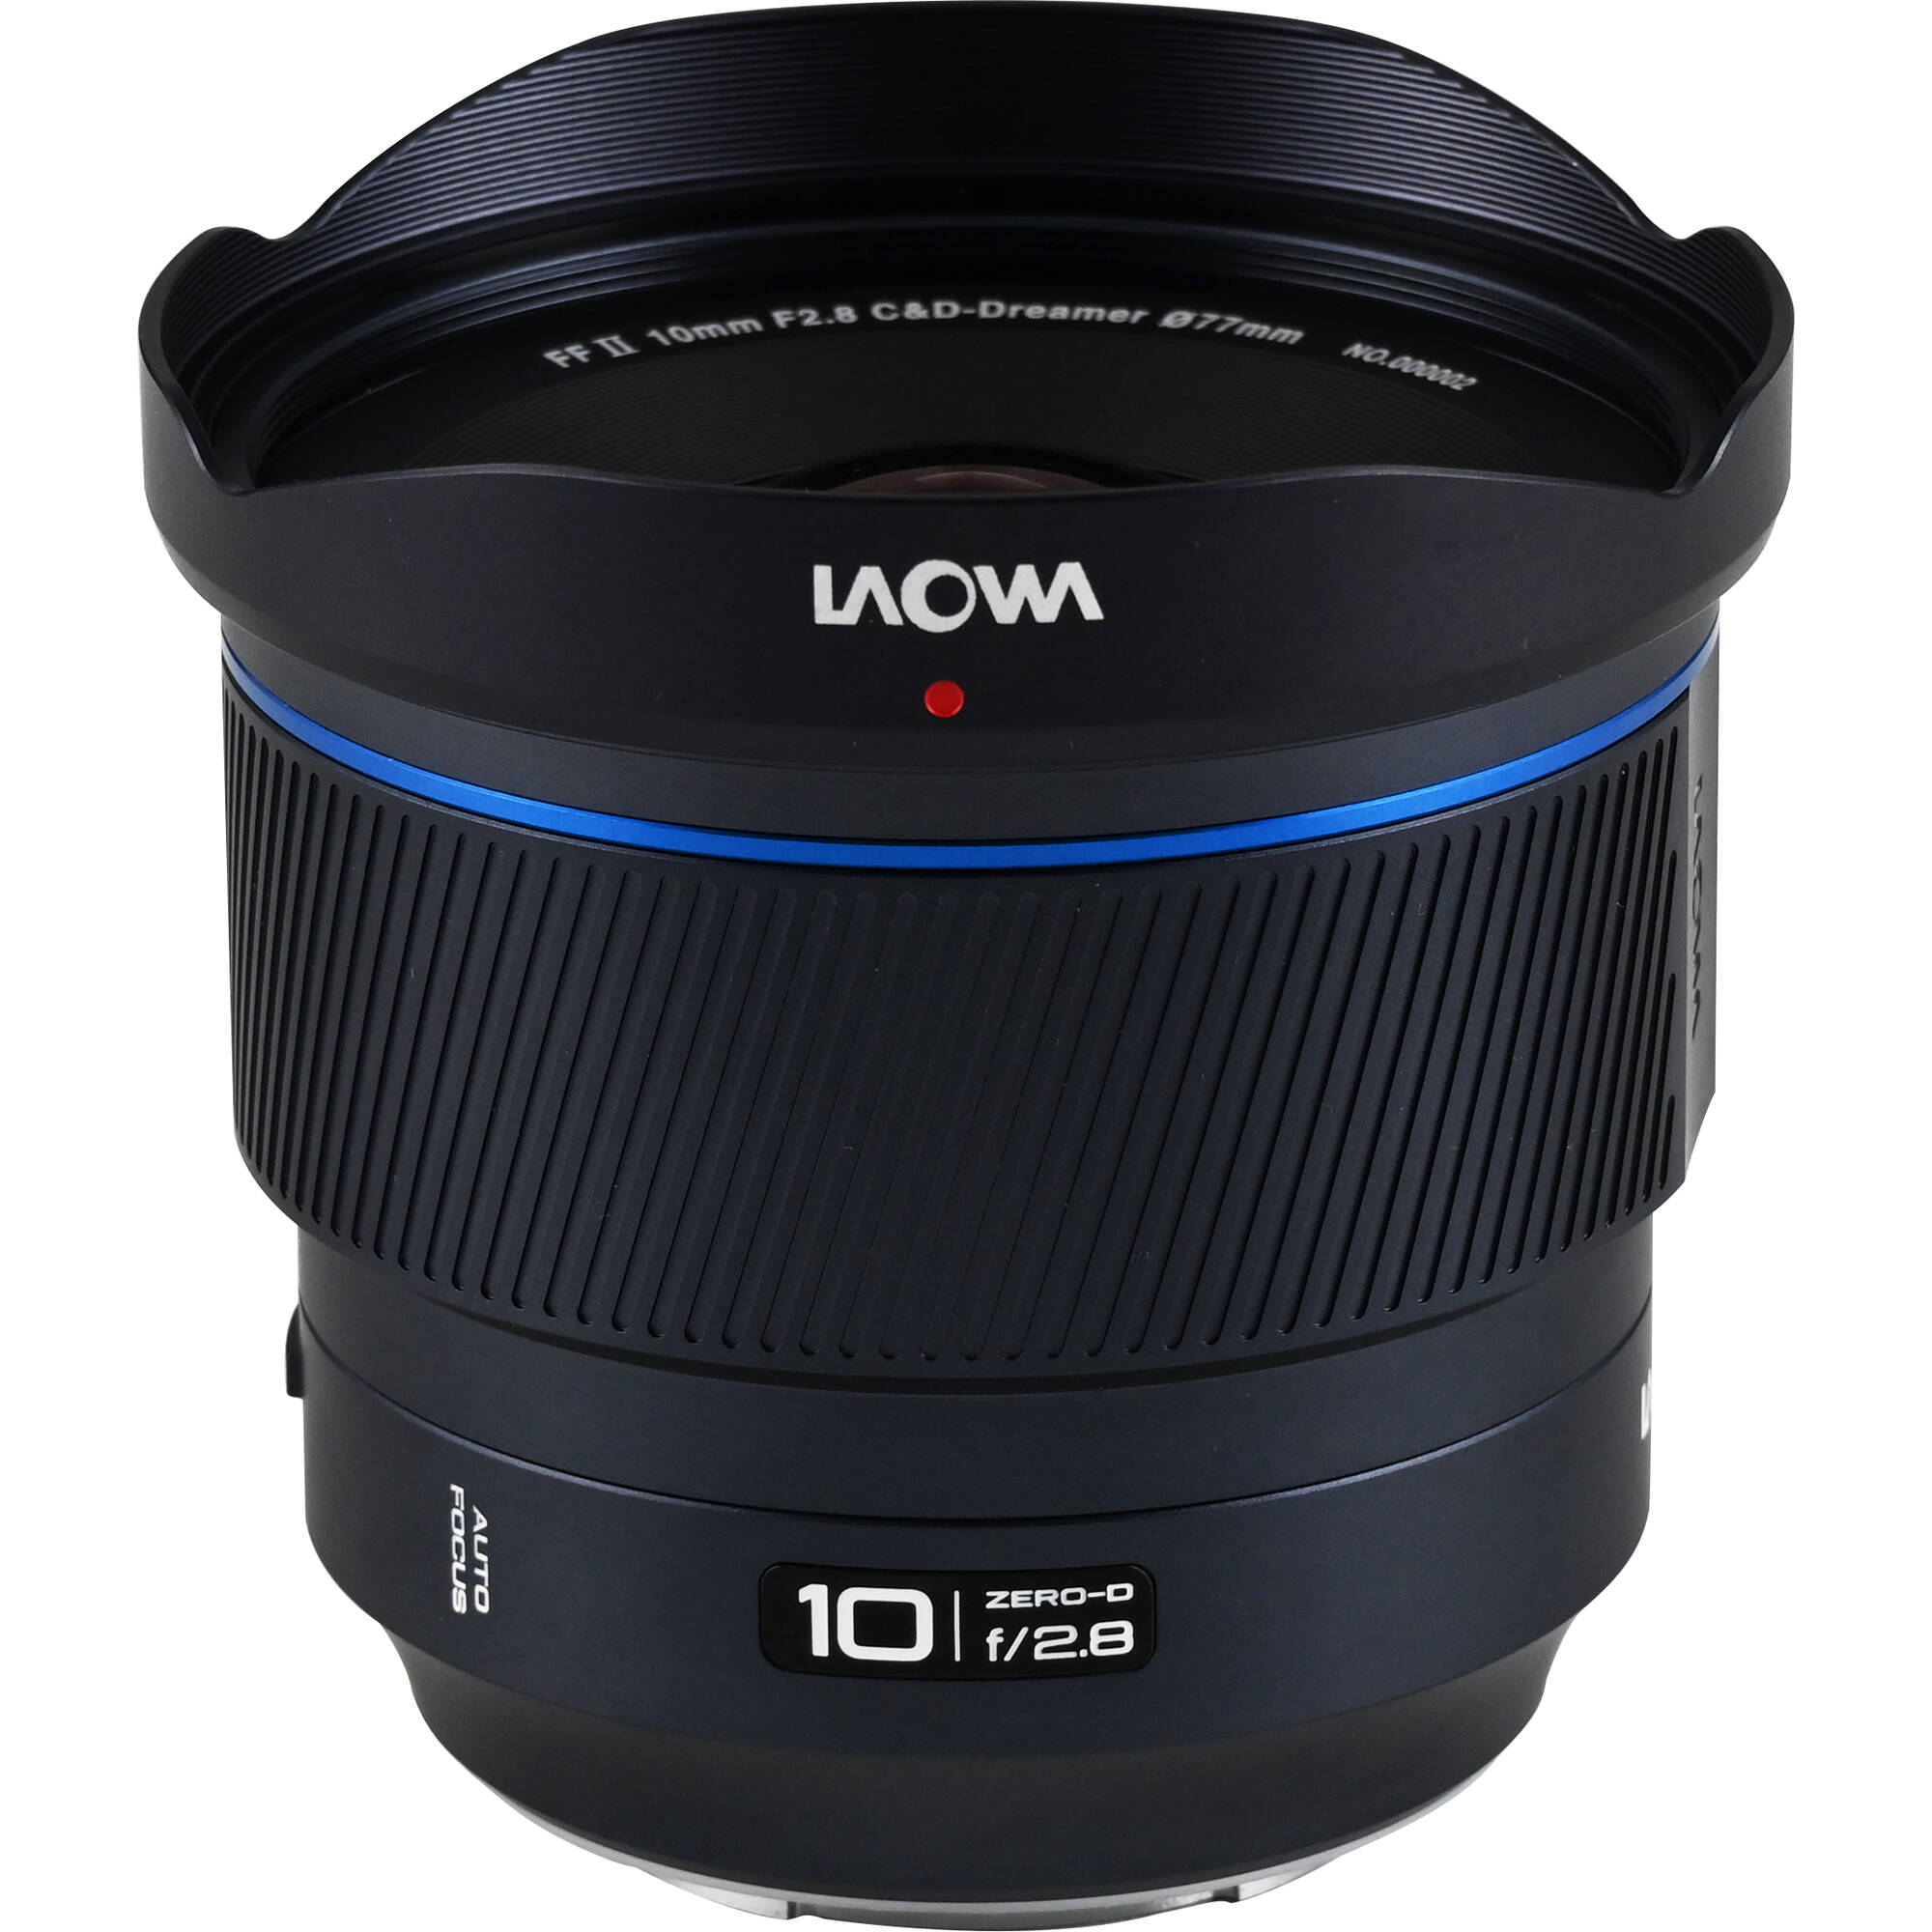 The World's First 10mm Lens with Autofocus and f/2.8 Aperture